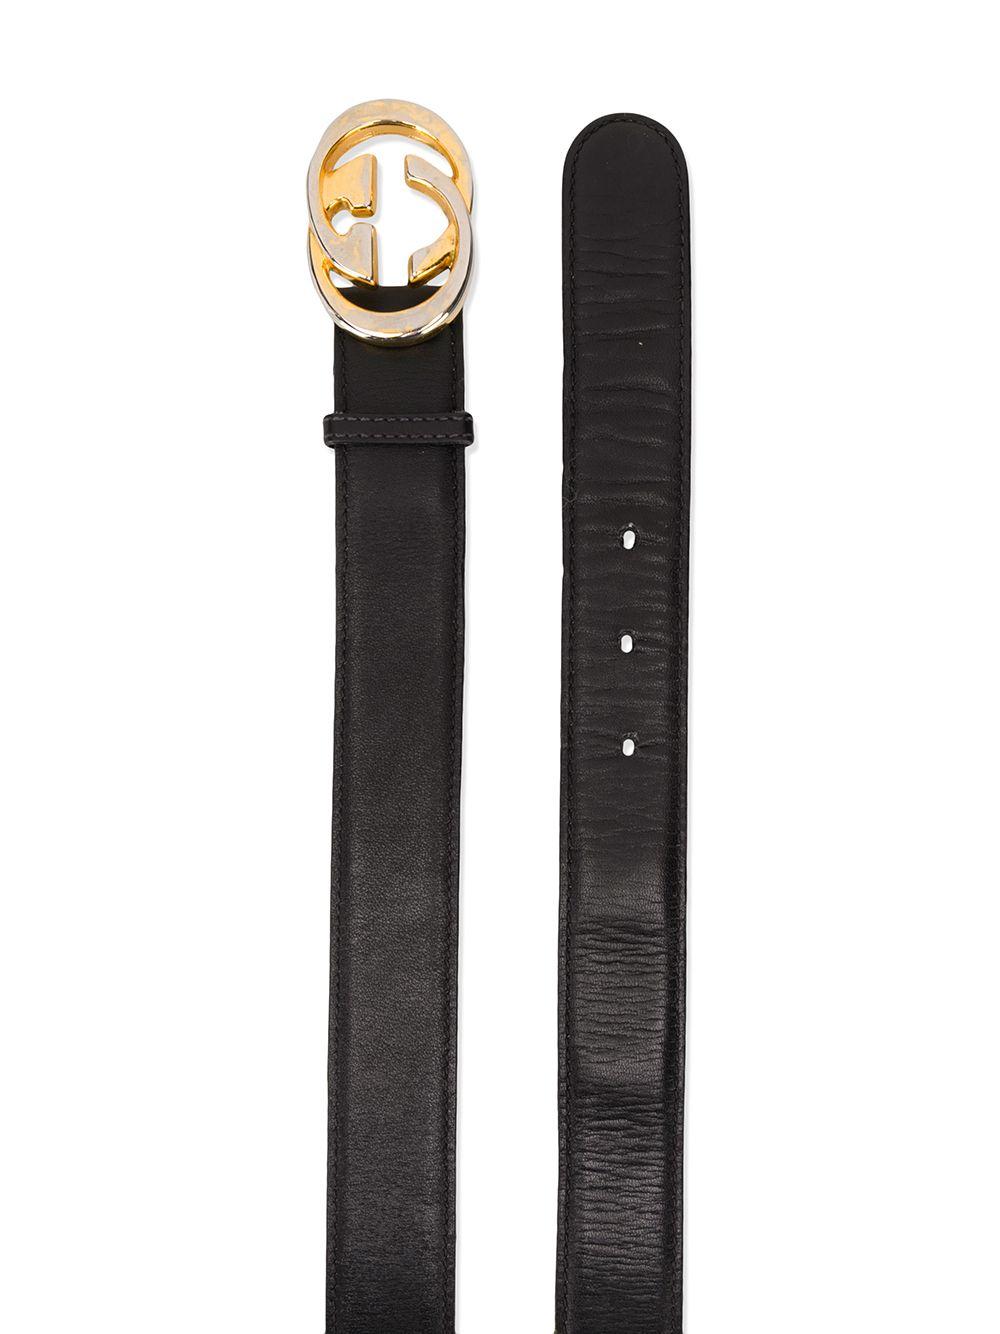 Crafted in Italy from pure black calf leather, this pre-owned belt by Gucci features an adjustable fit, matching stitching and the signature 'GG' logo buckle accented by contrasting gold-tone metal hardware.

Colour: Black/ Gold

Composition: Calf